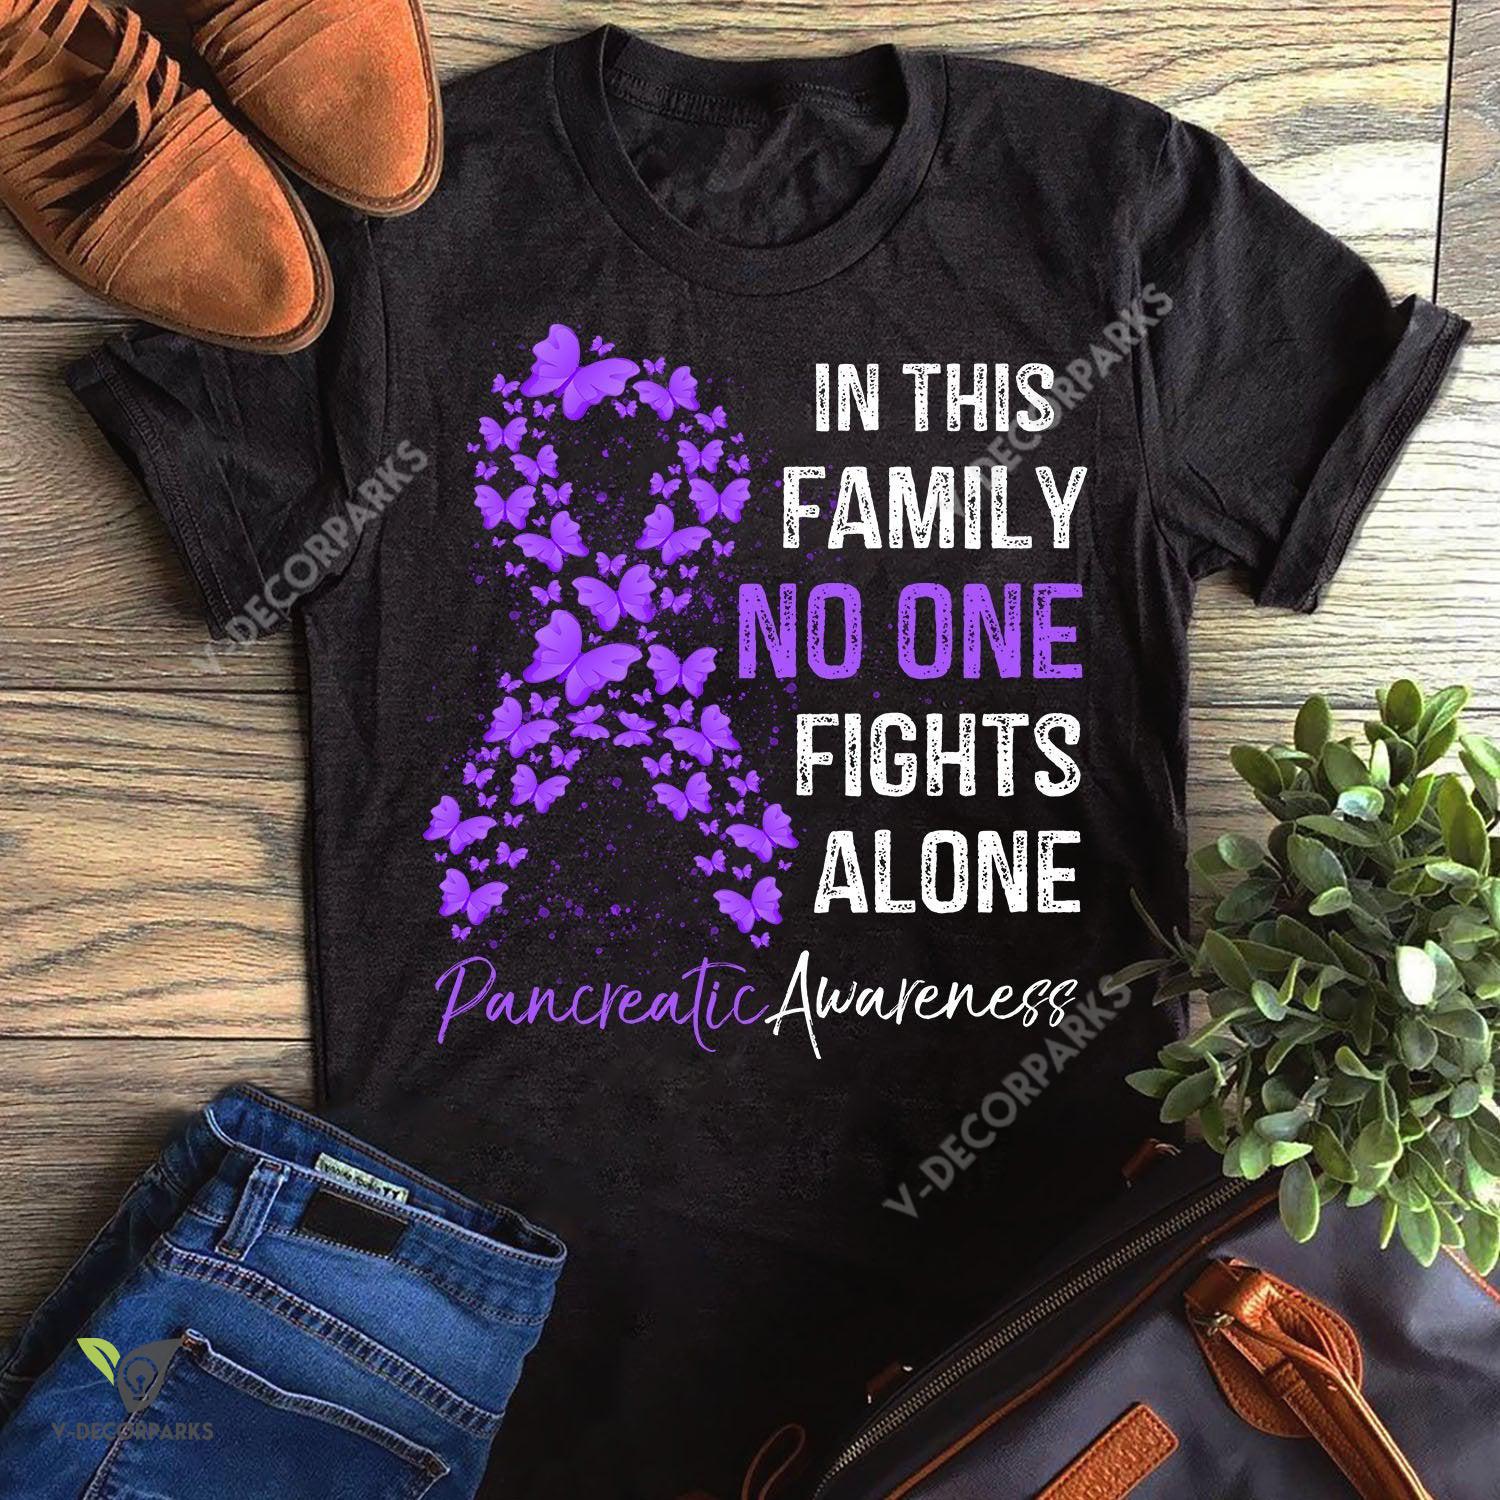 Butterfly This Family No One Fights Alone Pancreatic Cancer Awareness Graphic Unisex T Shirt, Sweatshirt, Hoodie Size S - 5xl